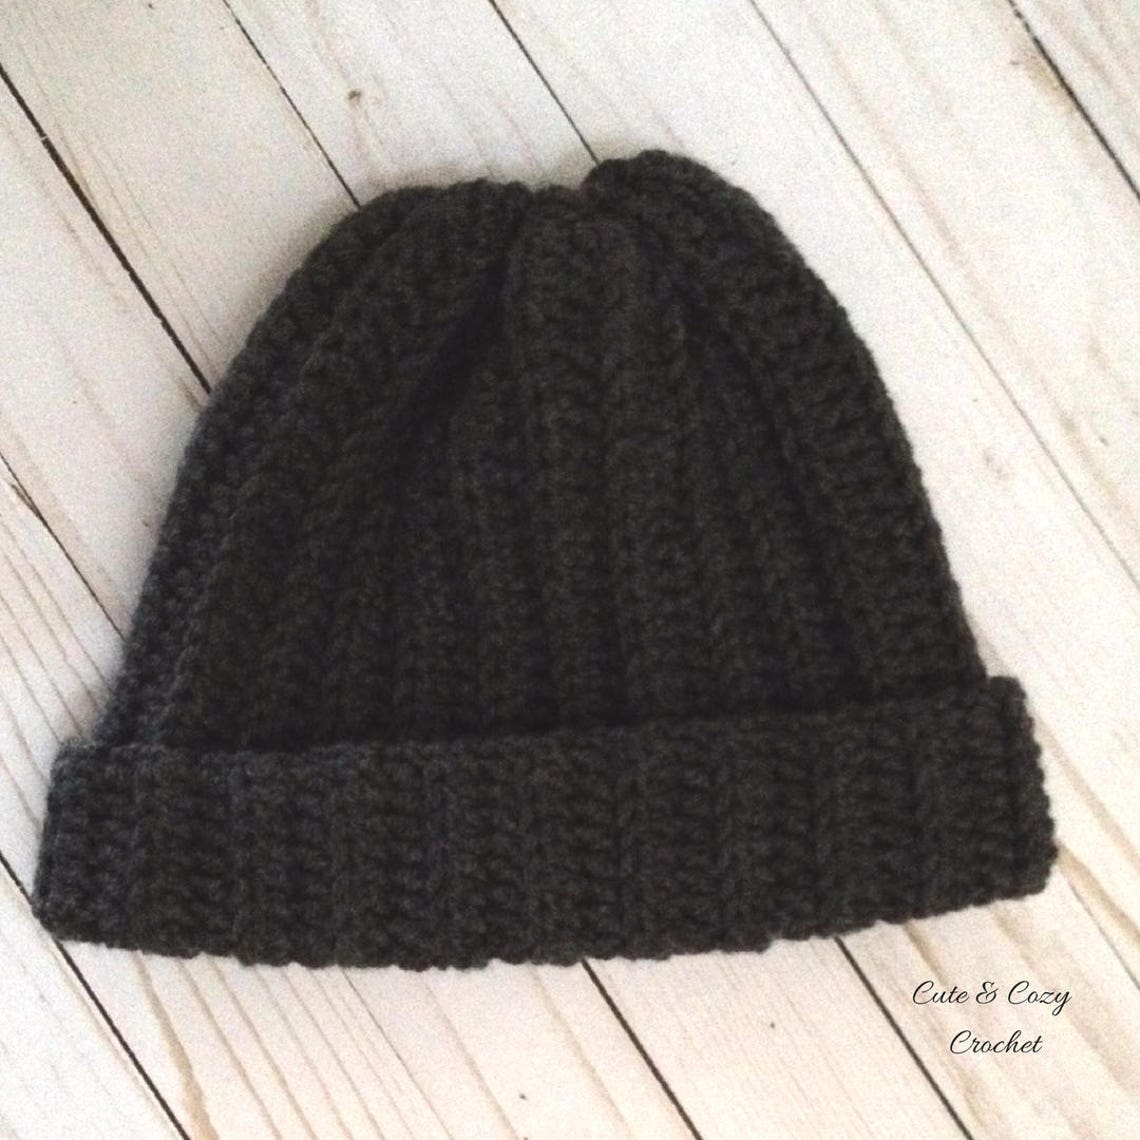 Men's Wool Ribbed Hat PATTERN ONLY - Etsy